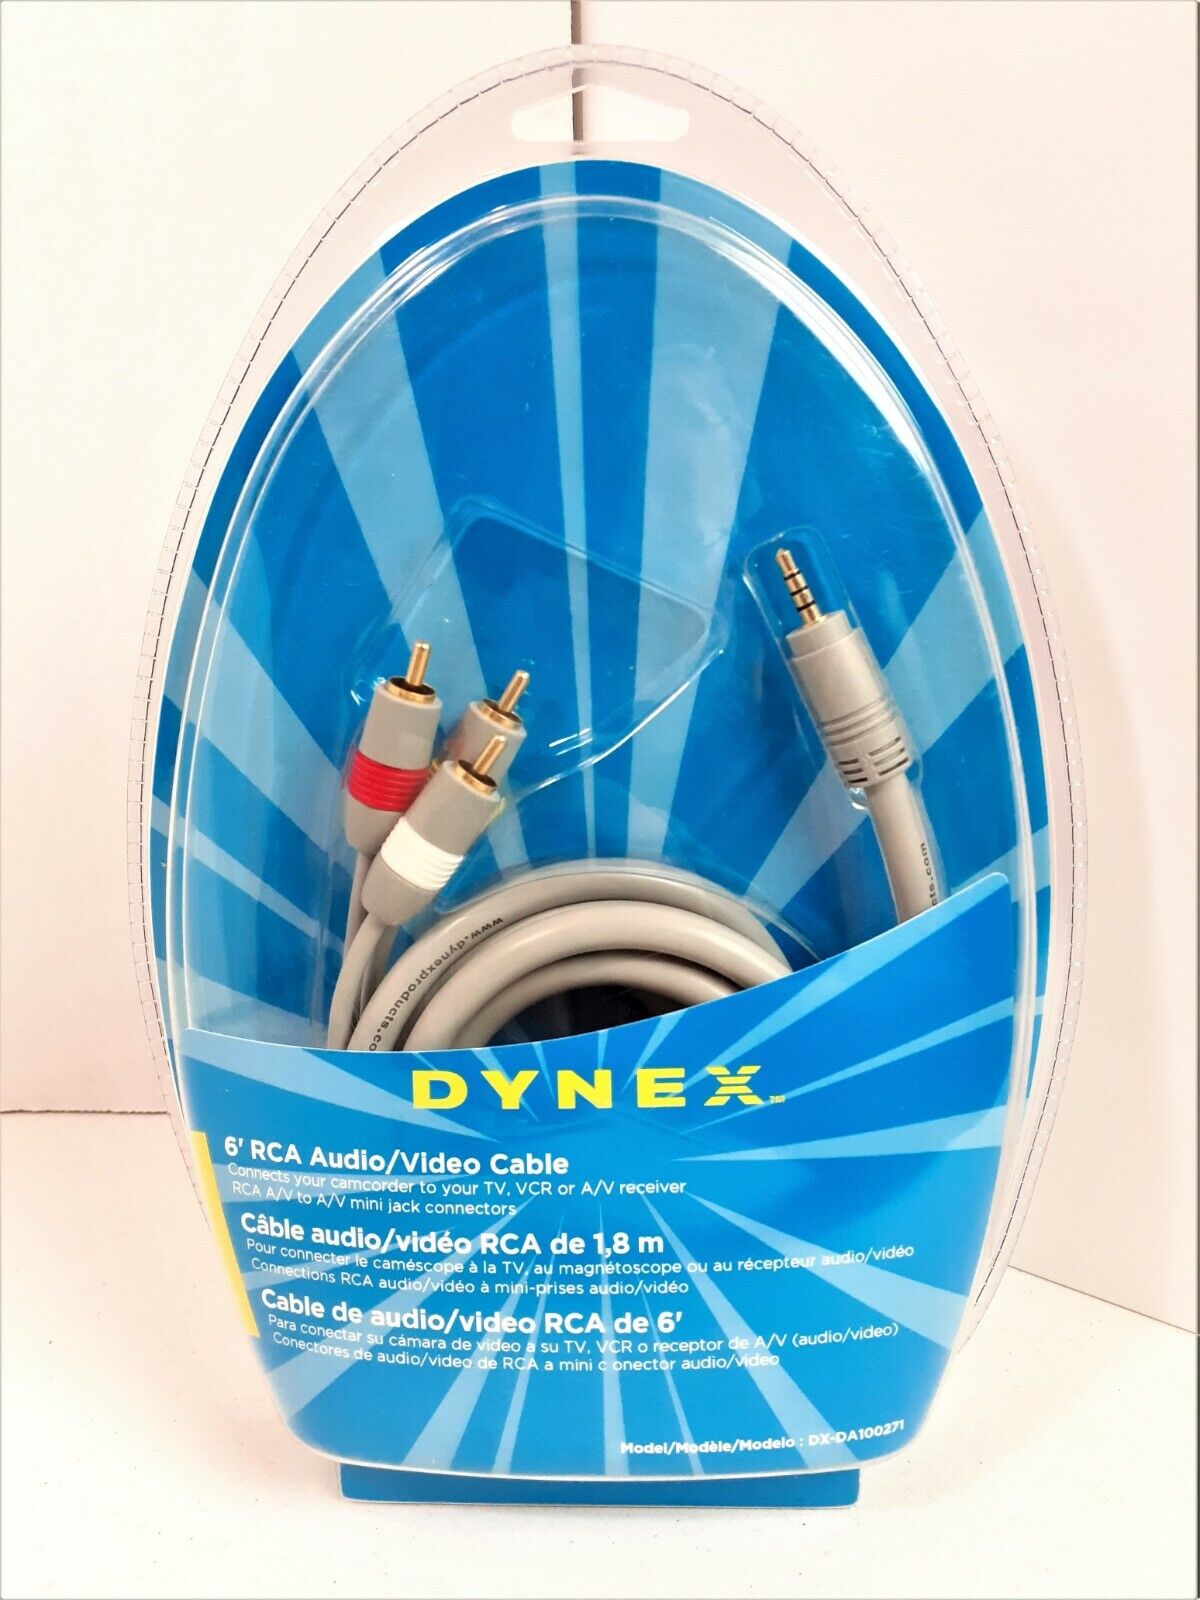 NEW Dynex 6 foot RCA Audio Video Cable DX-DA100271 **   720